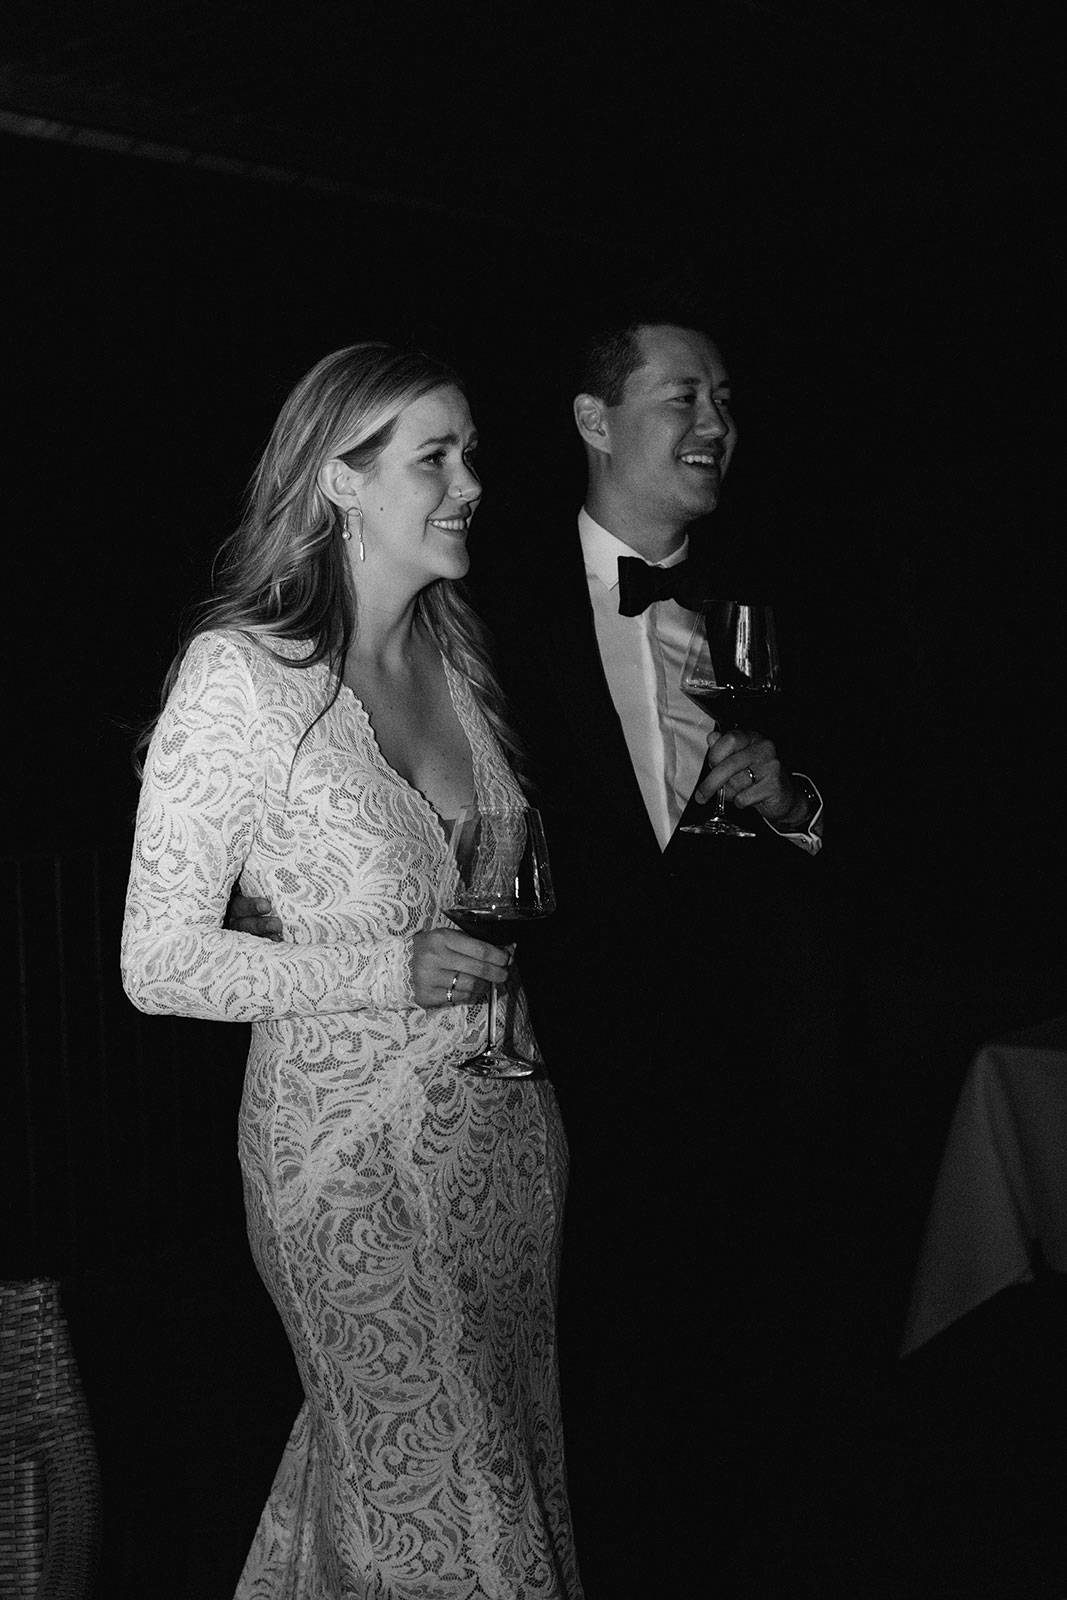 Black and white image of Bride and Groom holding a glass of wine